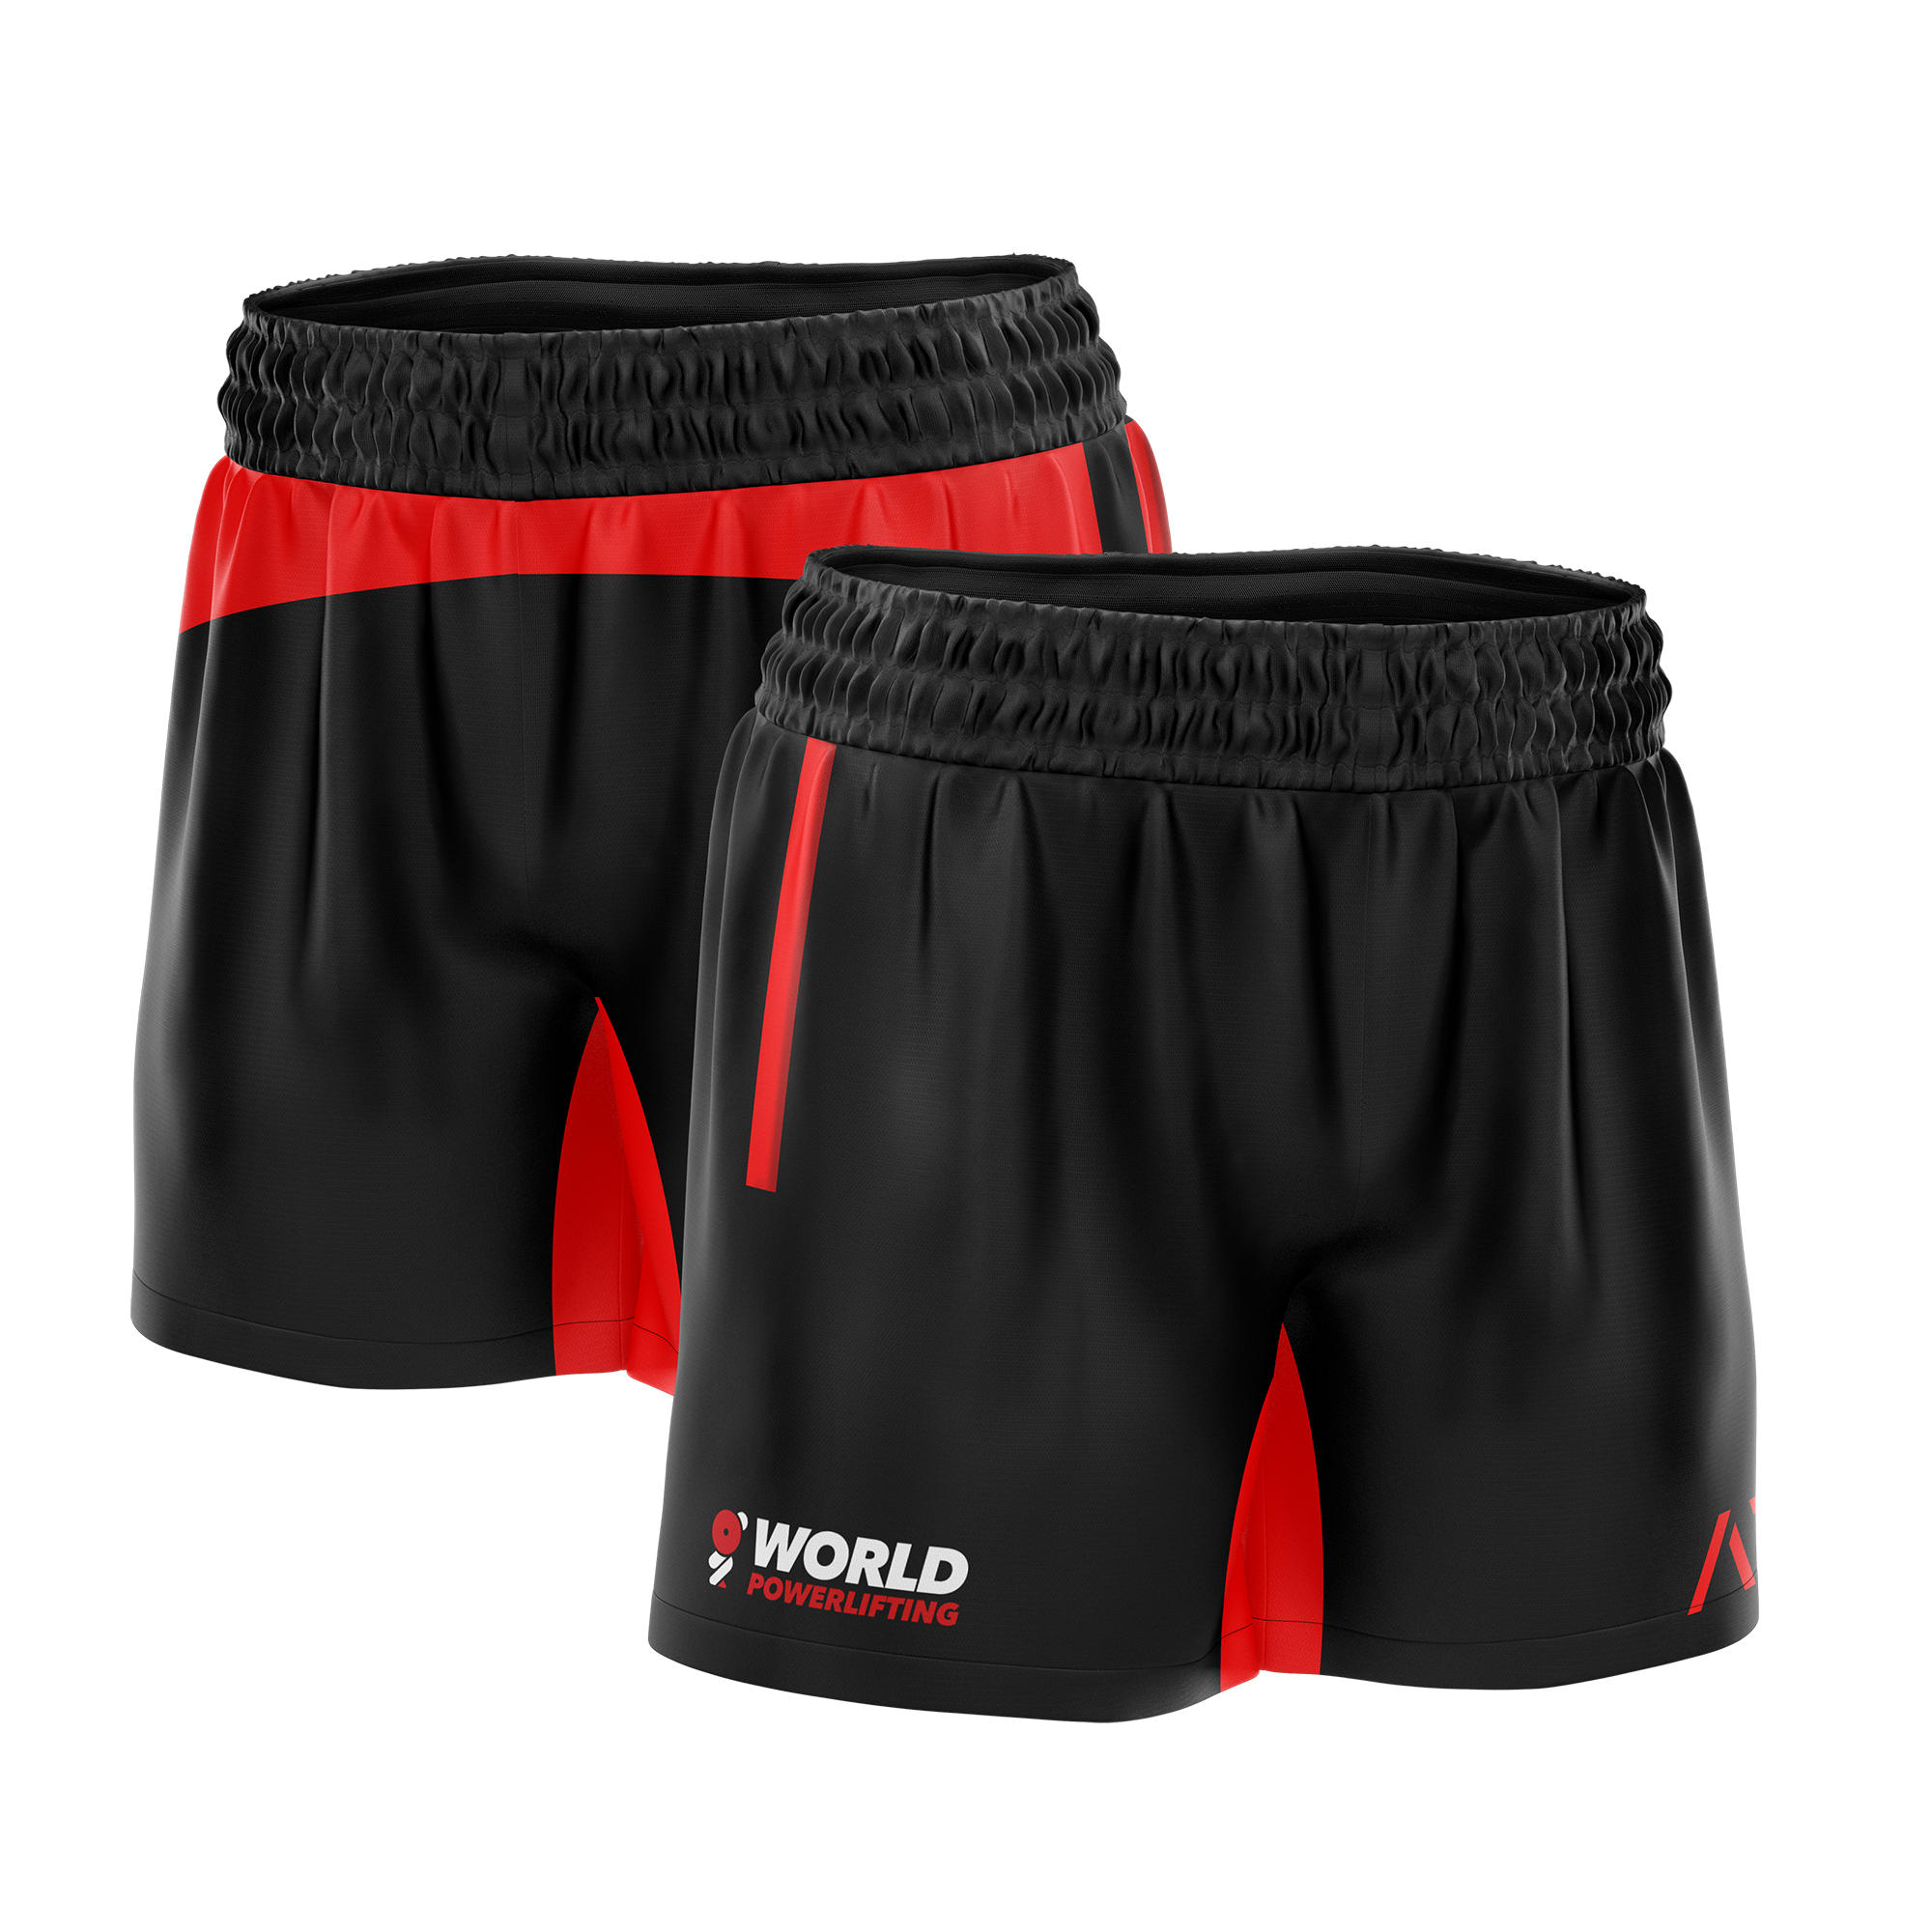 https://shop.worldpowerlifting.com/wp-content/uploads/2021/12/world-powerlifting-a7-shorts-primary.png